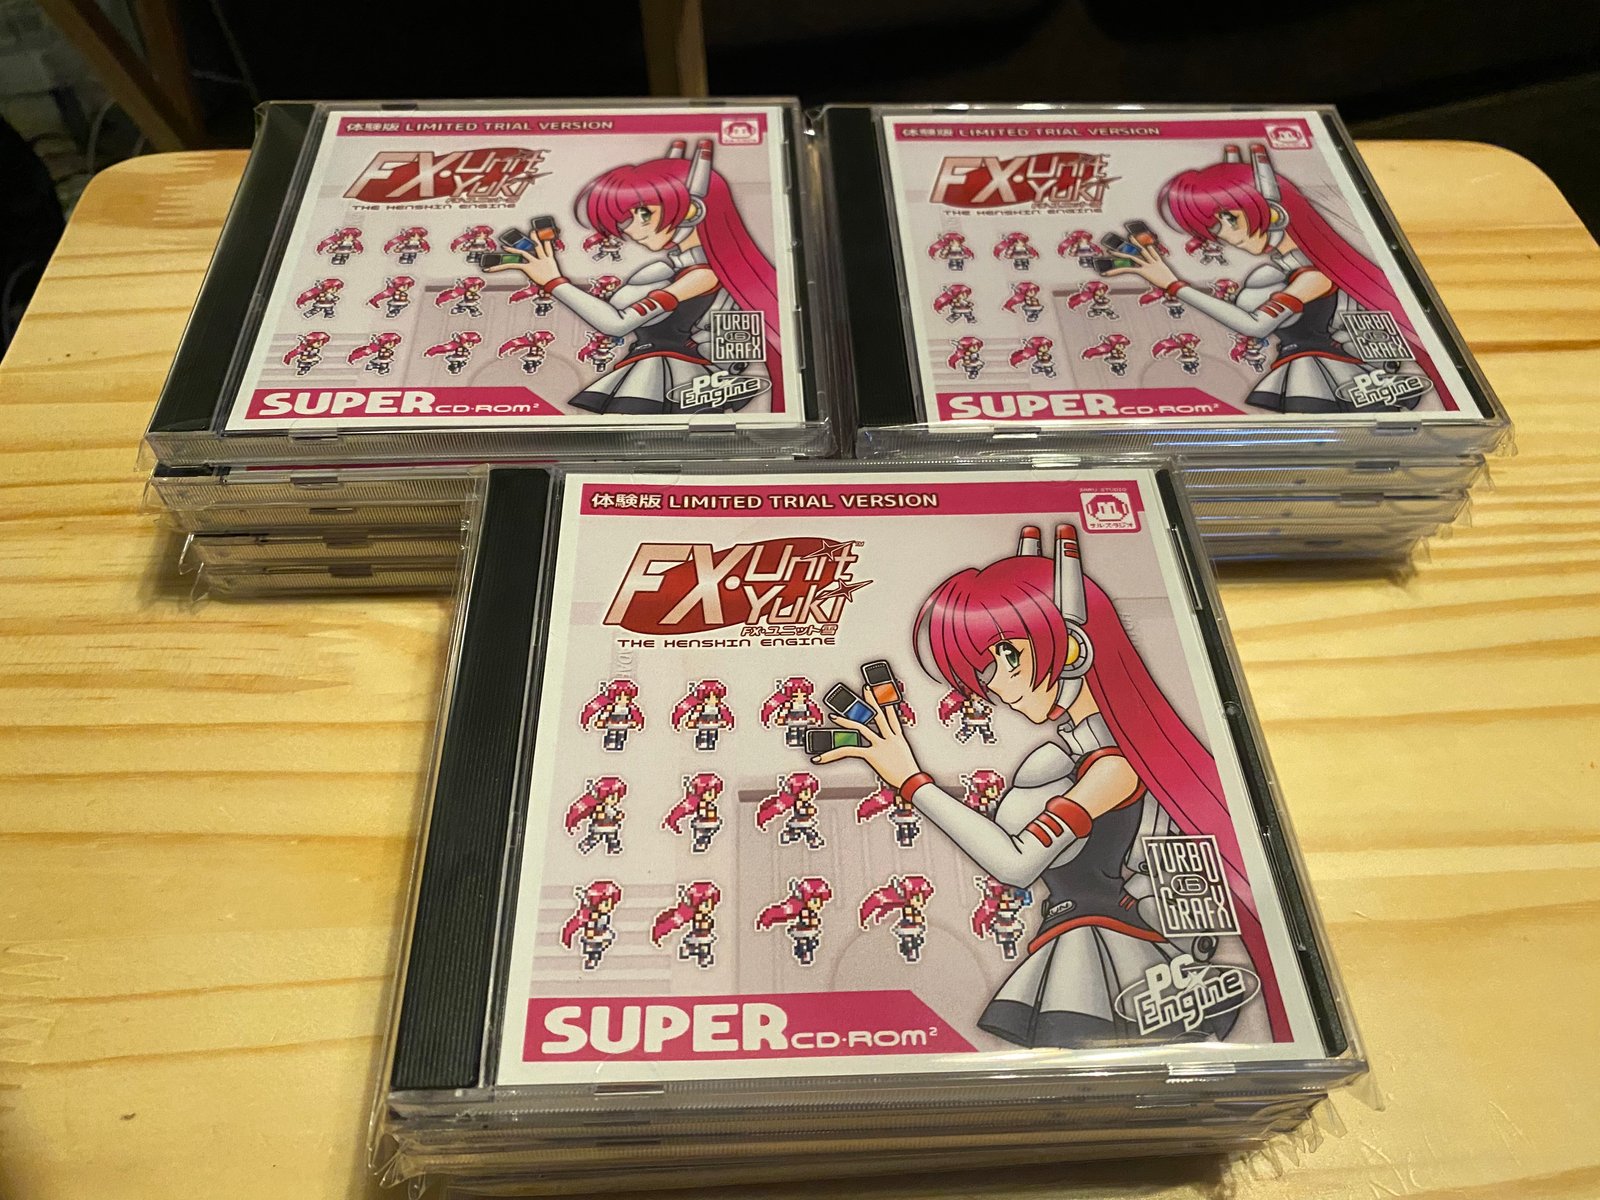 FX Unit Yuki Limited Trial Version for the Pc Engine (only 20 